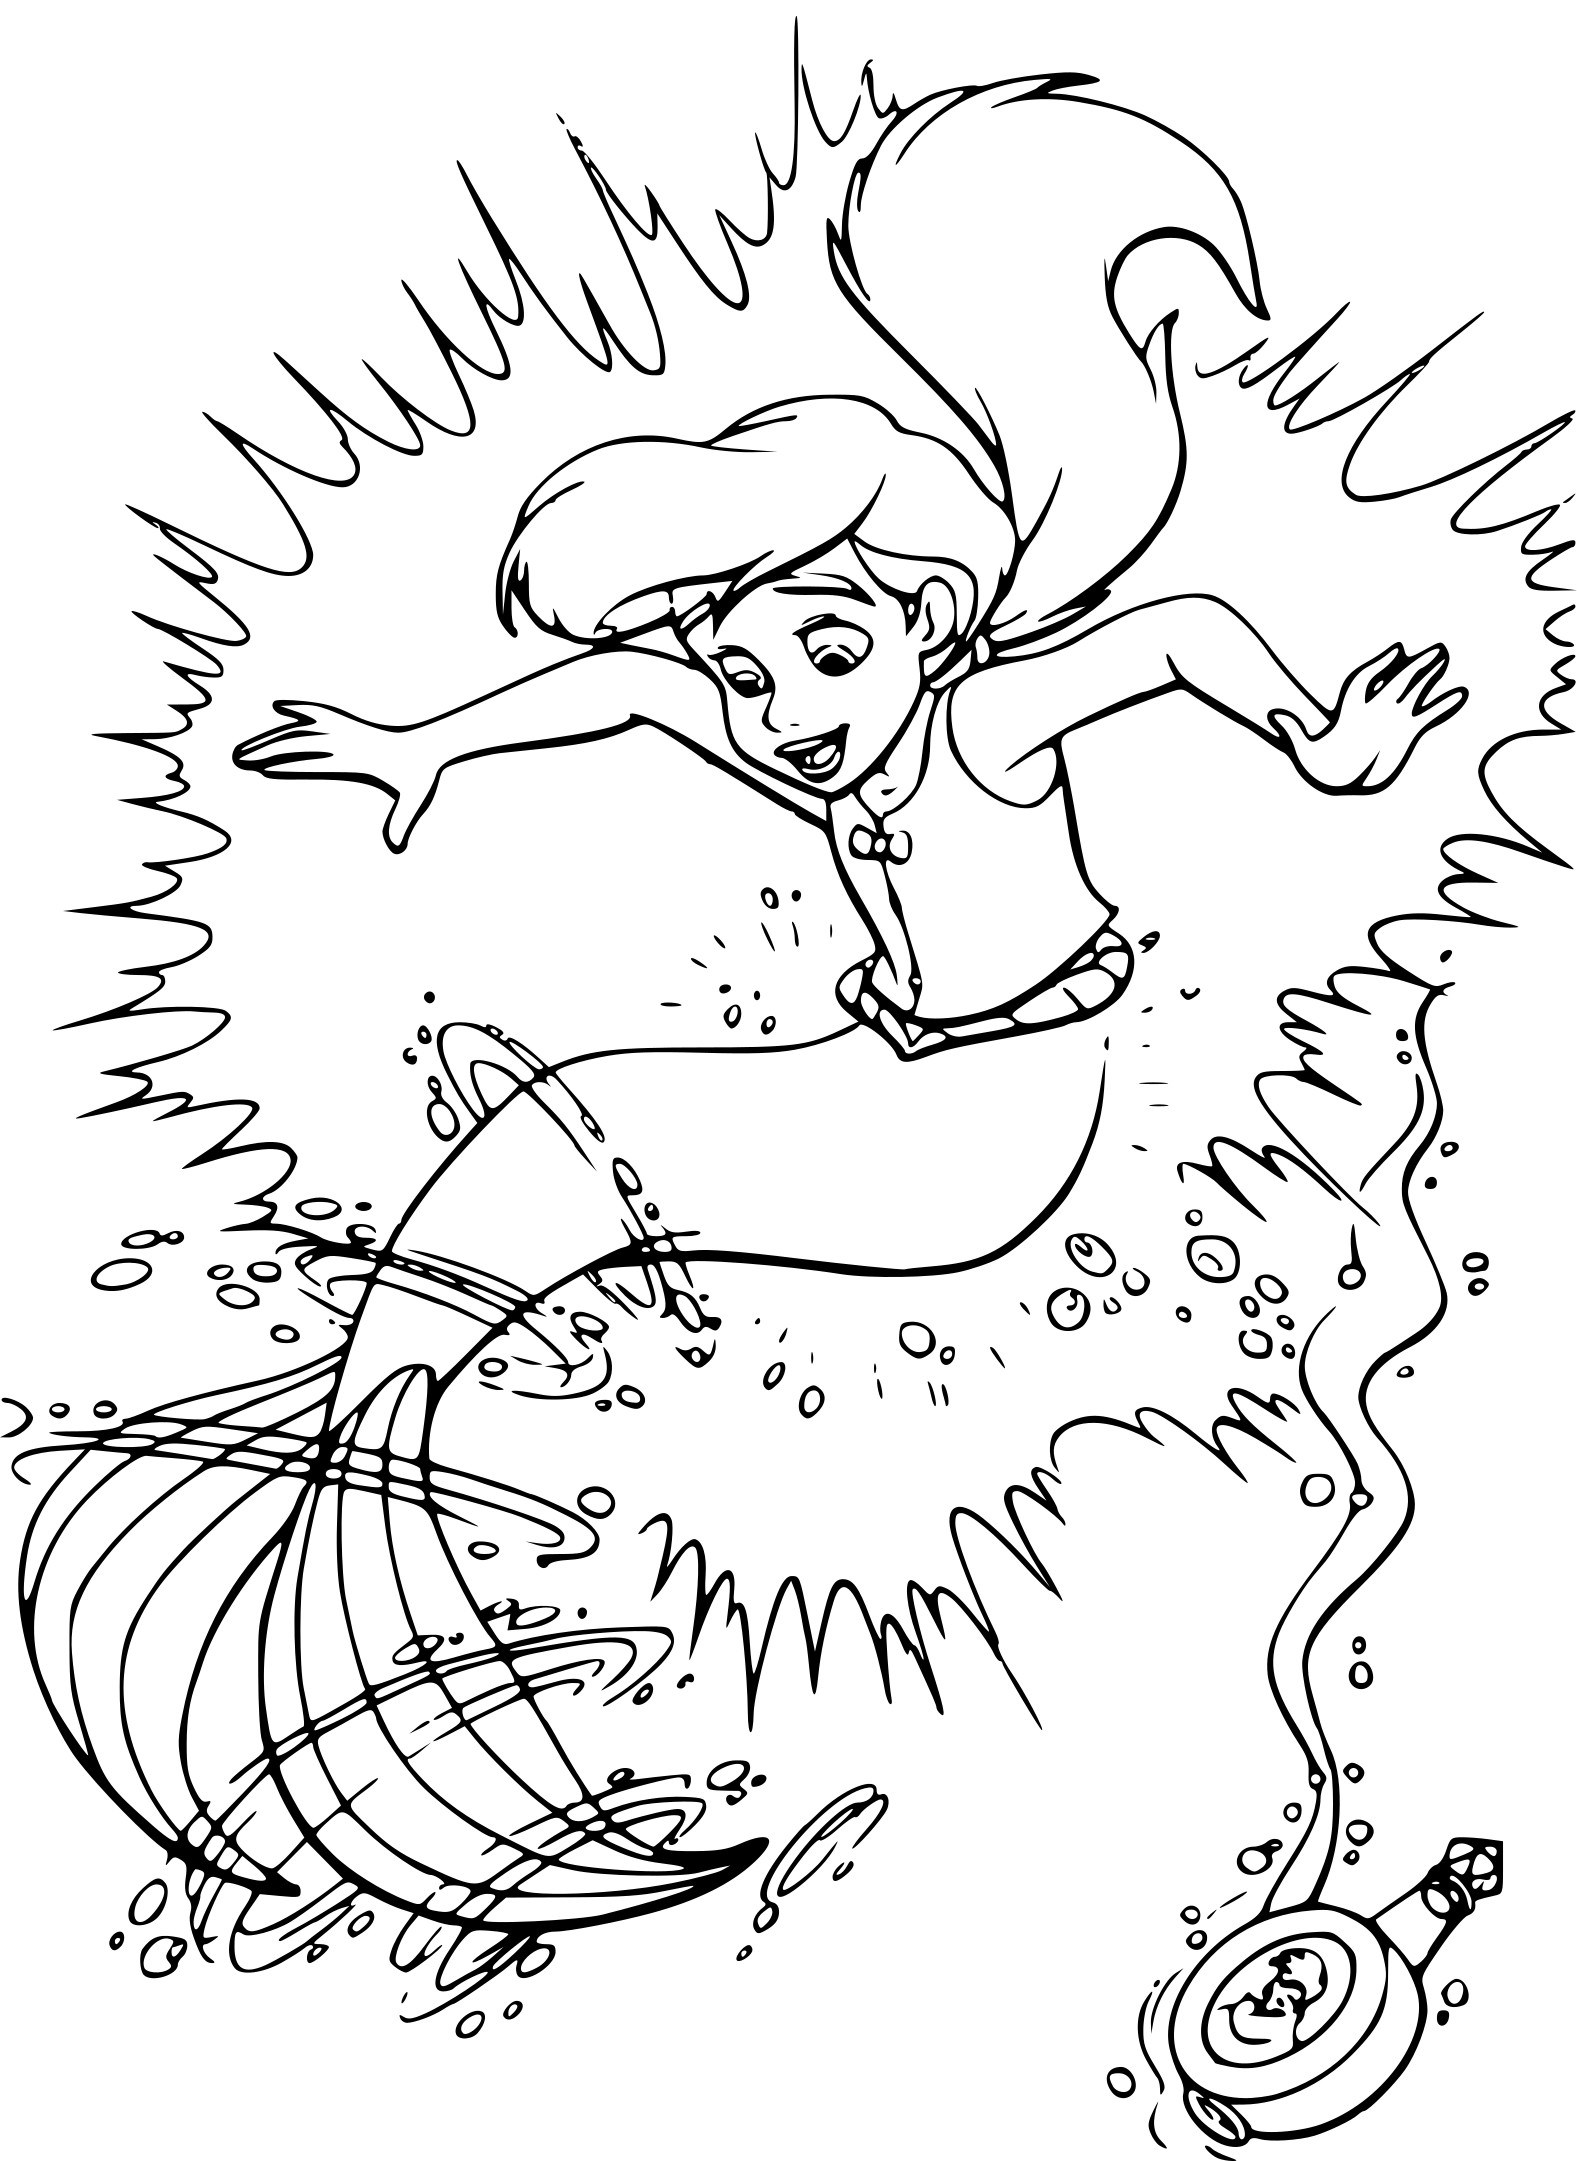 The Little Mermaid 2 coloring page